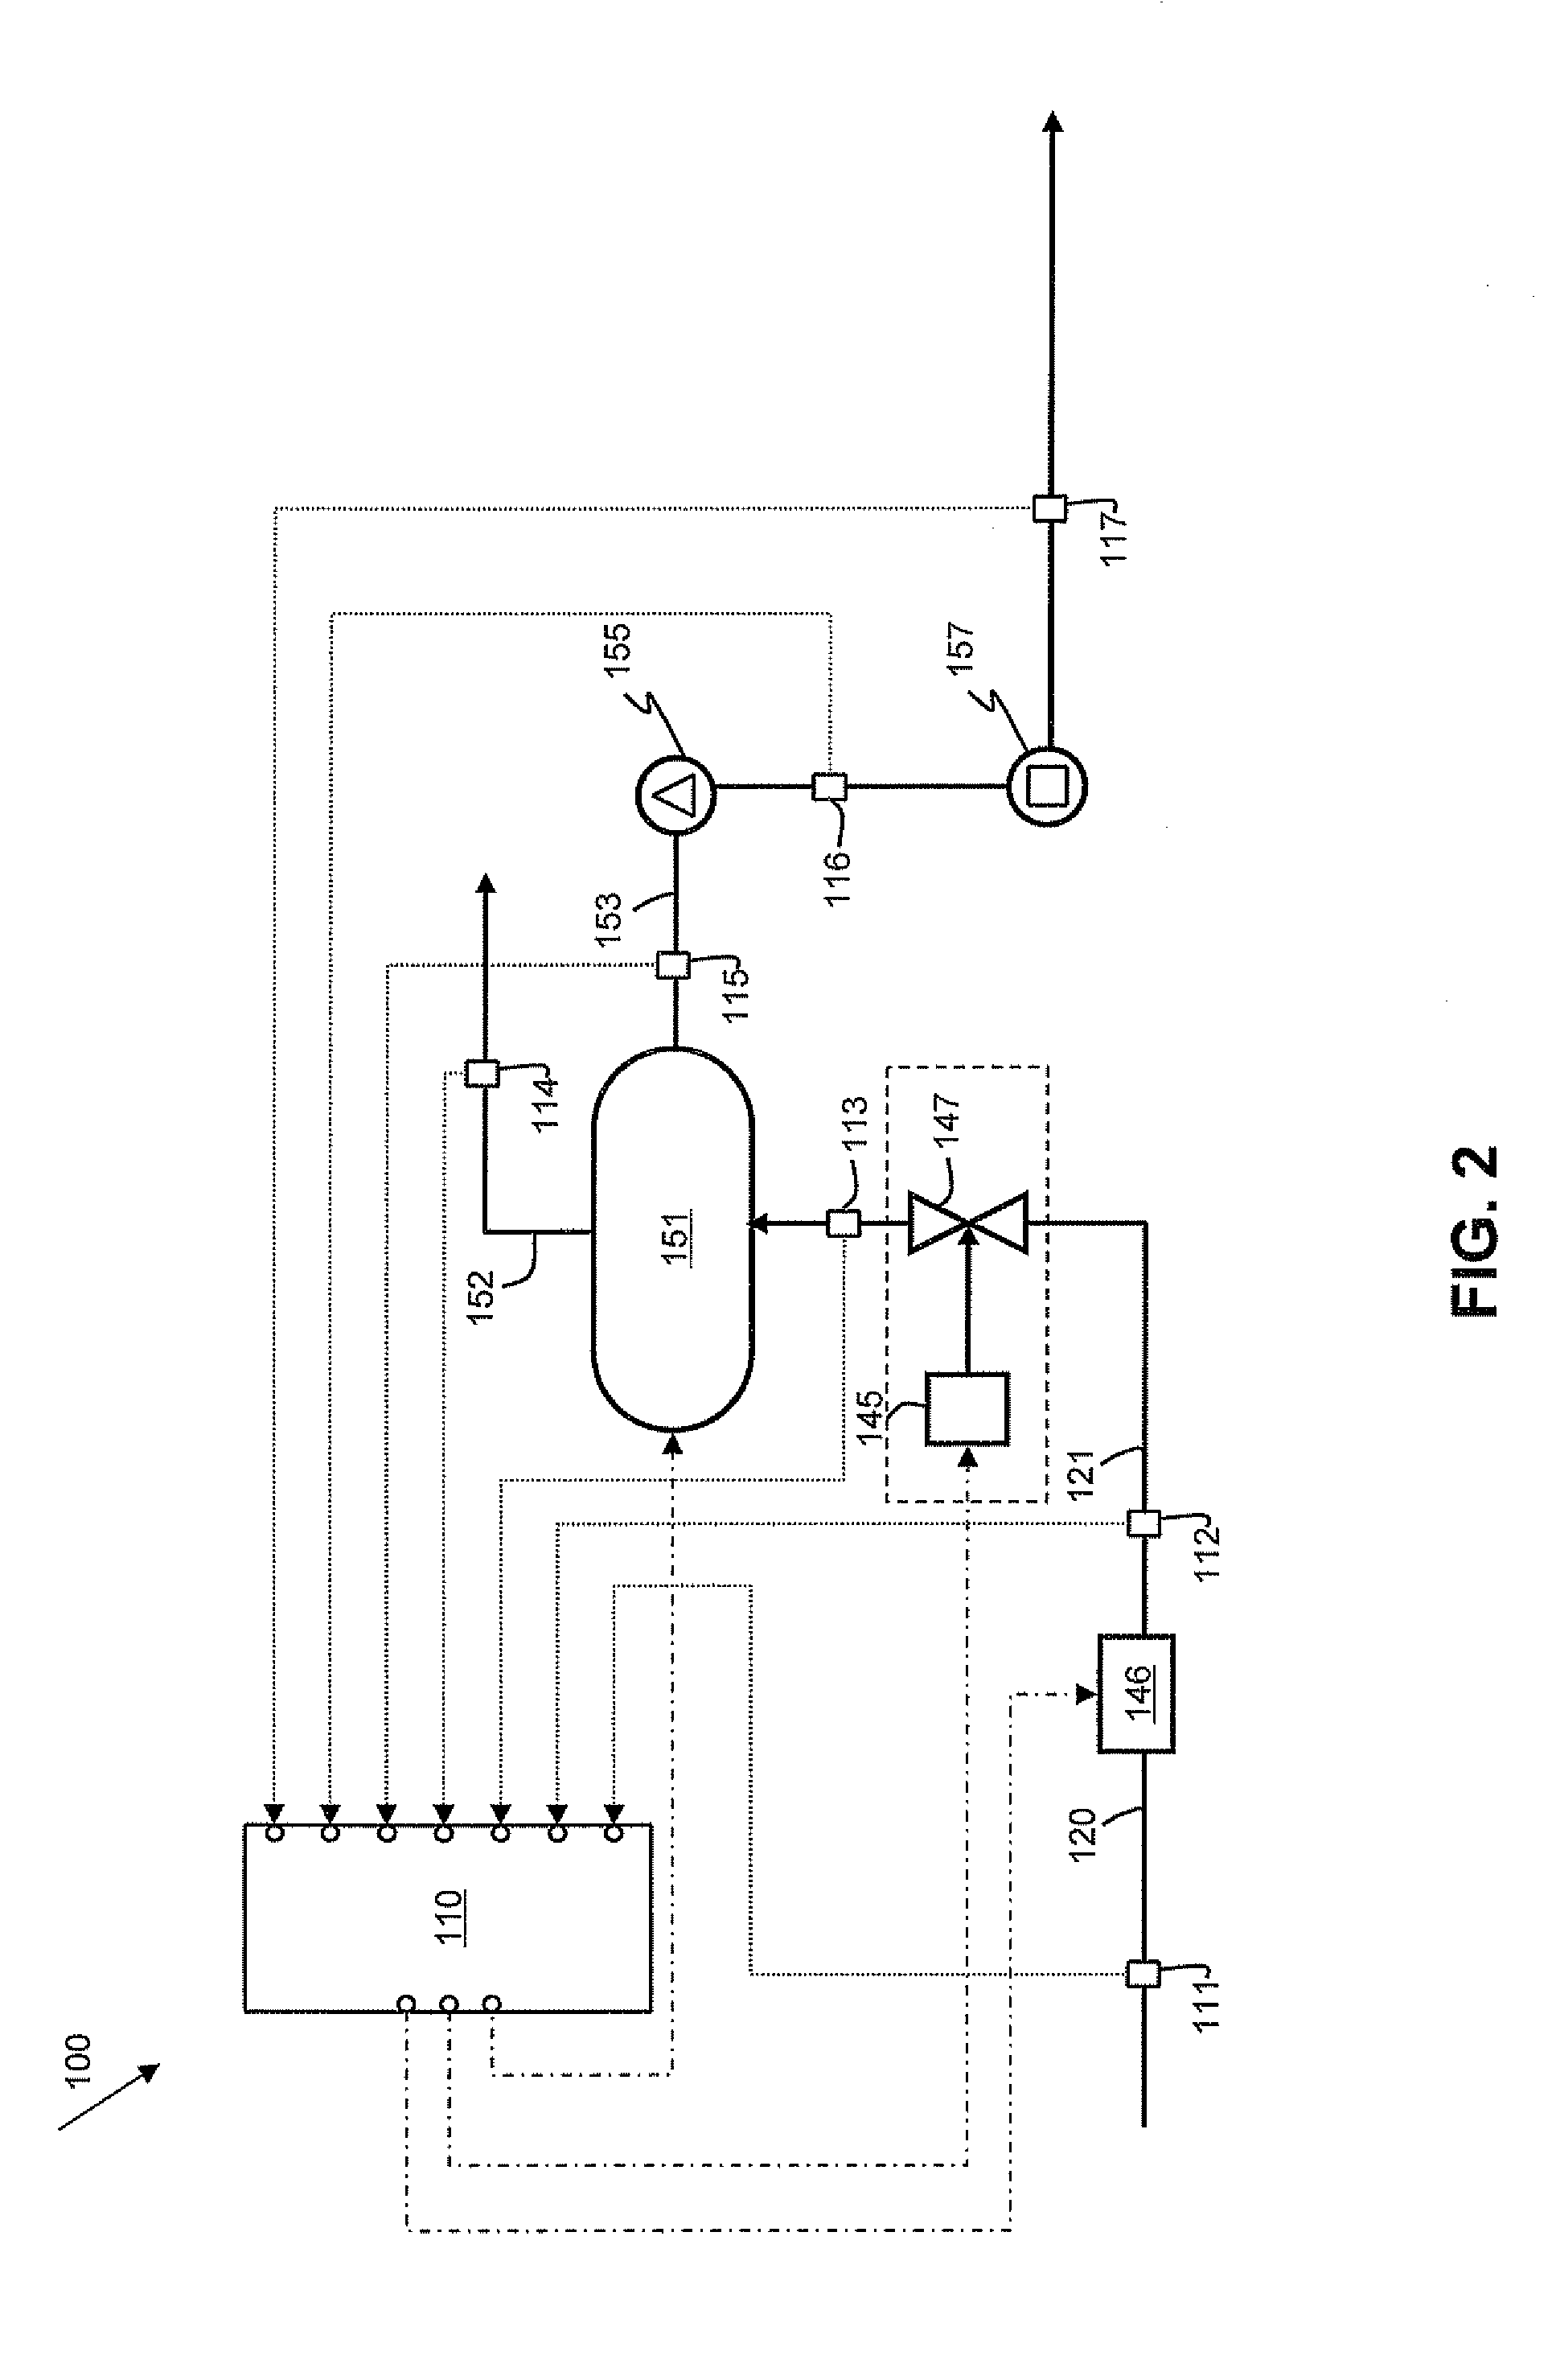 Dynamic demulsification system for use in a gas-oil separation plant